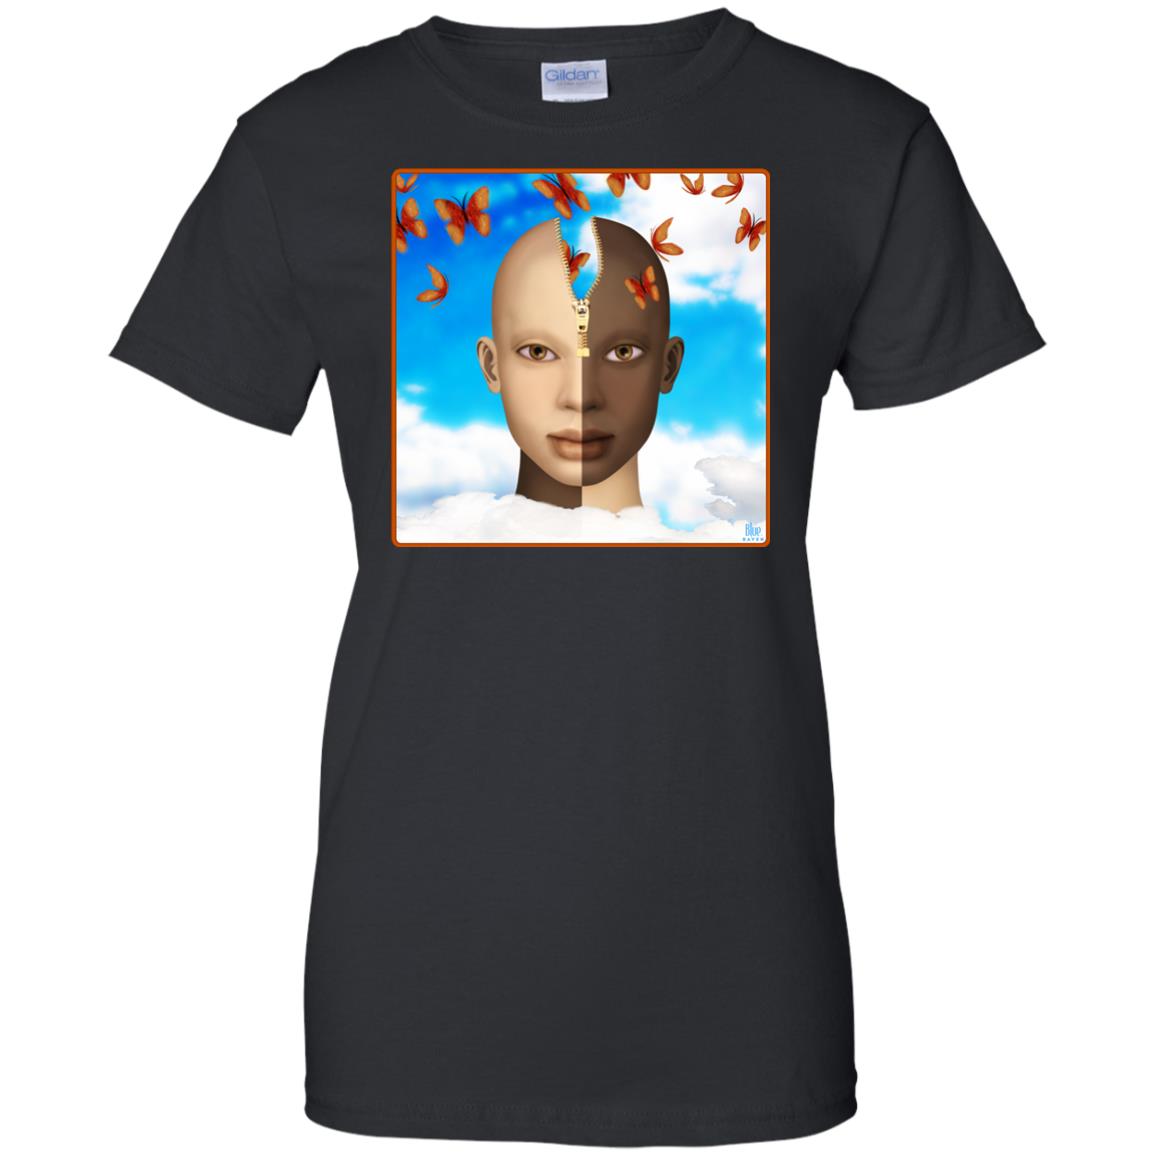 color of our thoughts - Women's Relaxed Fit T-Shirt